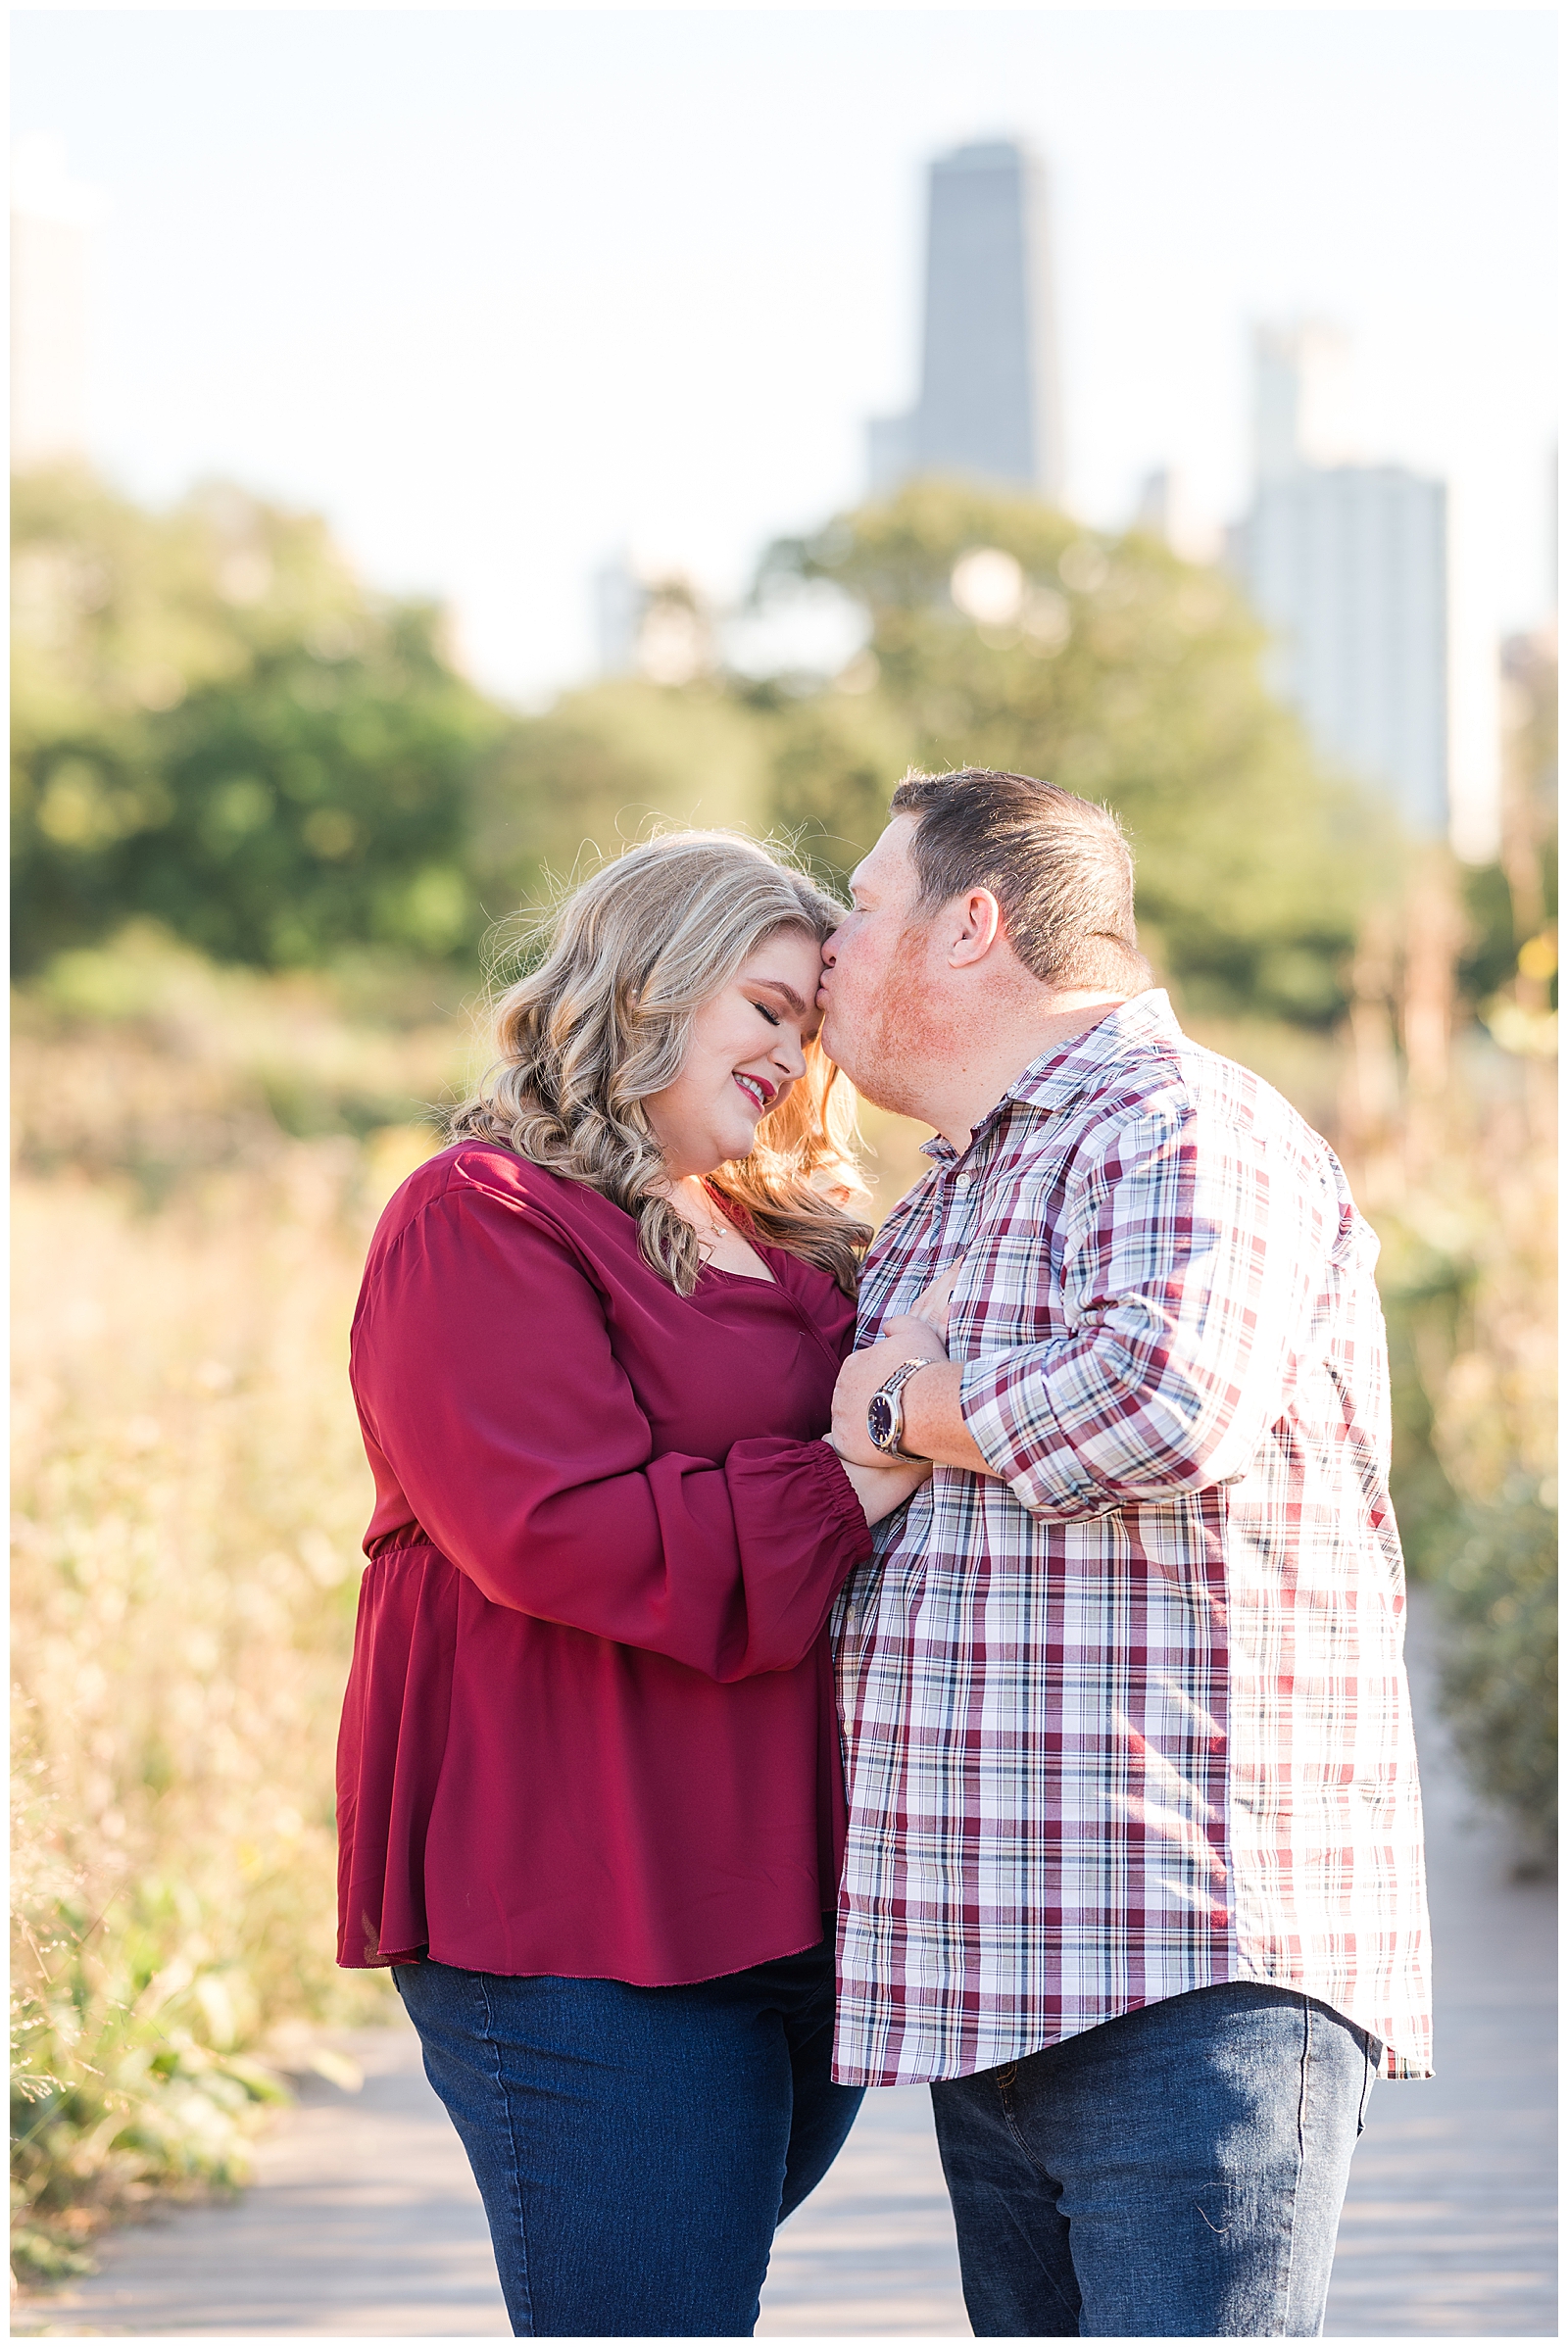 Sunset engagement session in Lincoln Park, Chicago